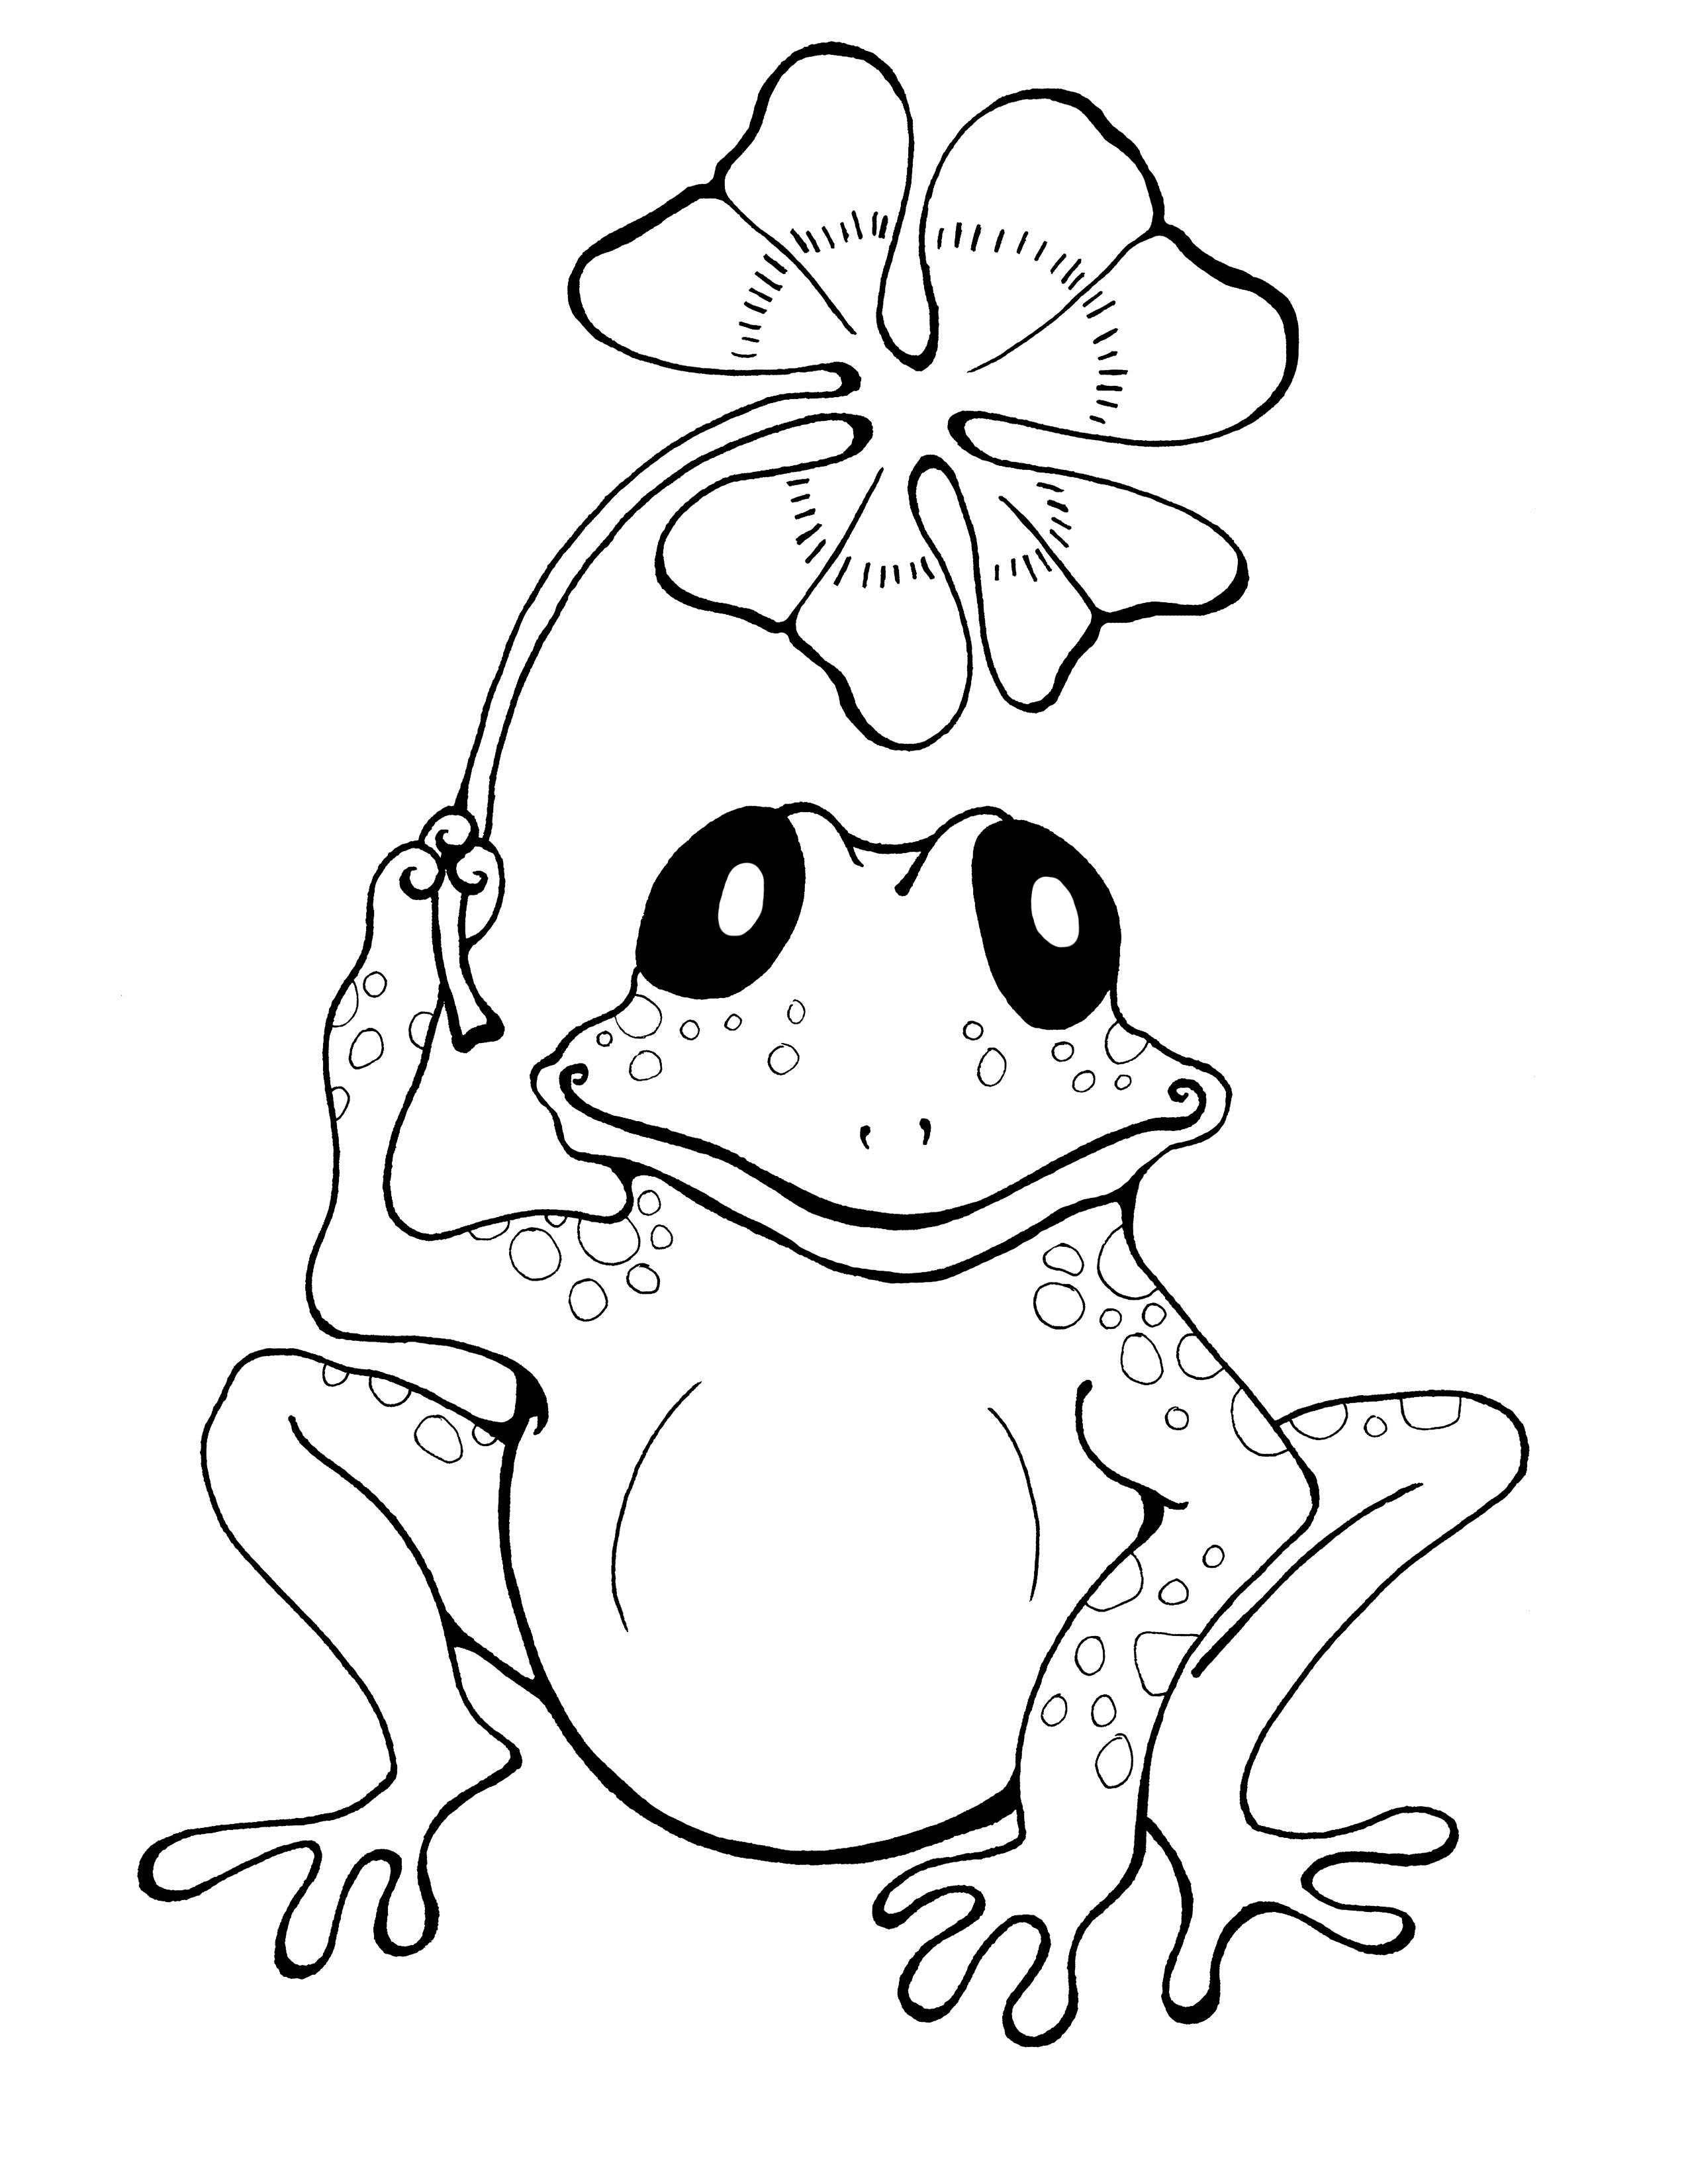 Printable Amphibian Coloring Pages - Frog Amphibian Coloring Pages